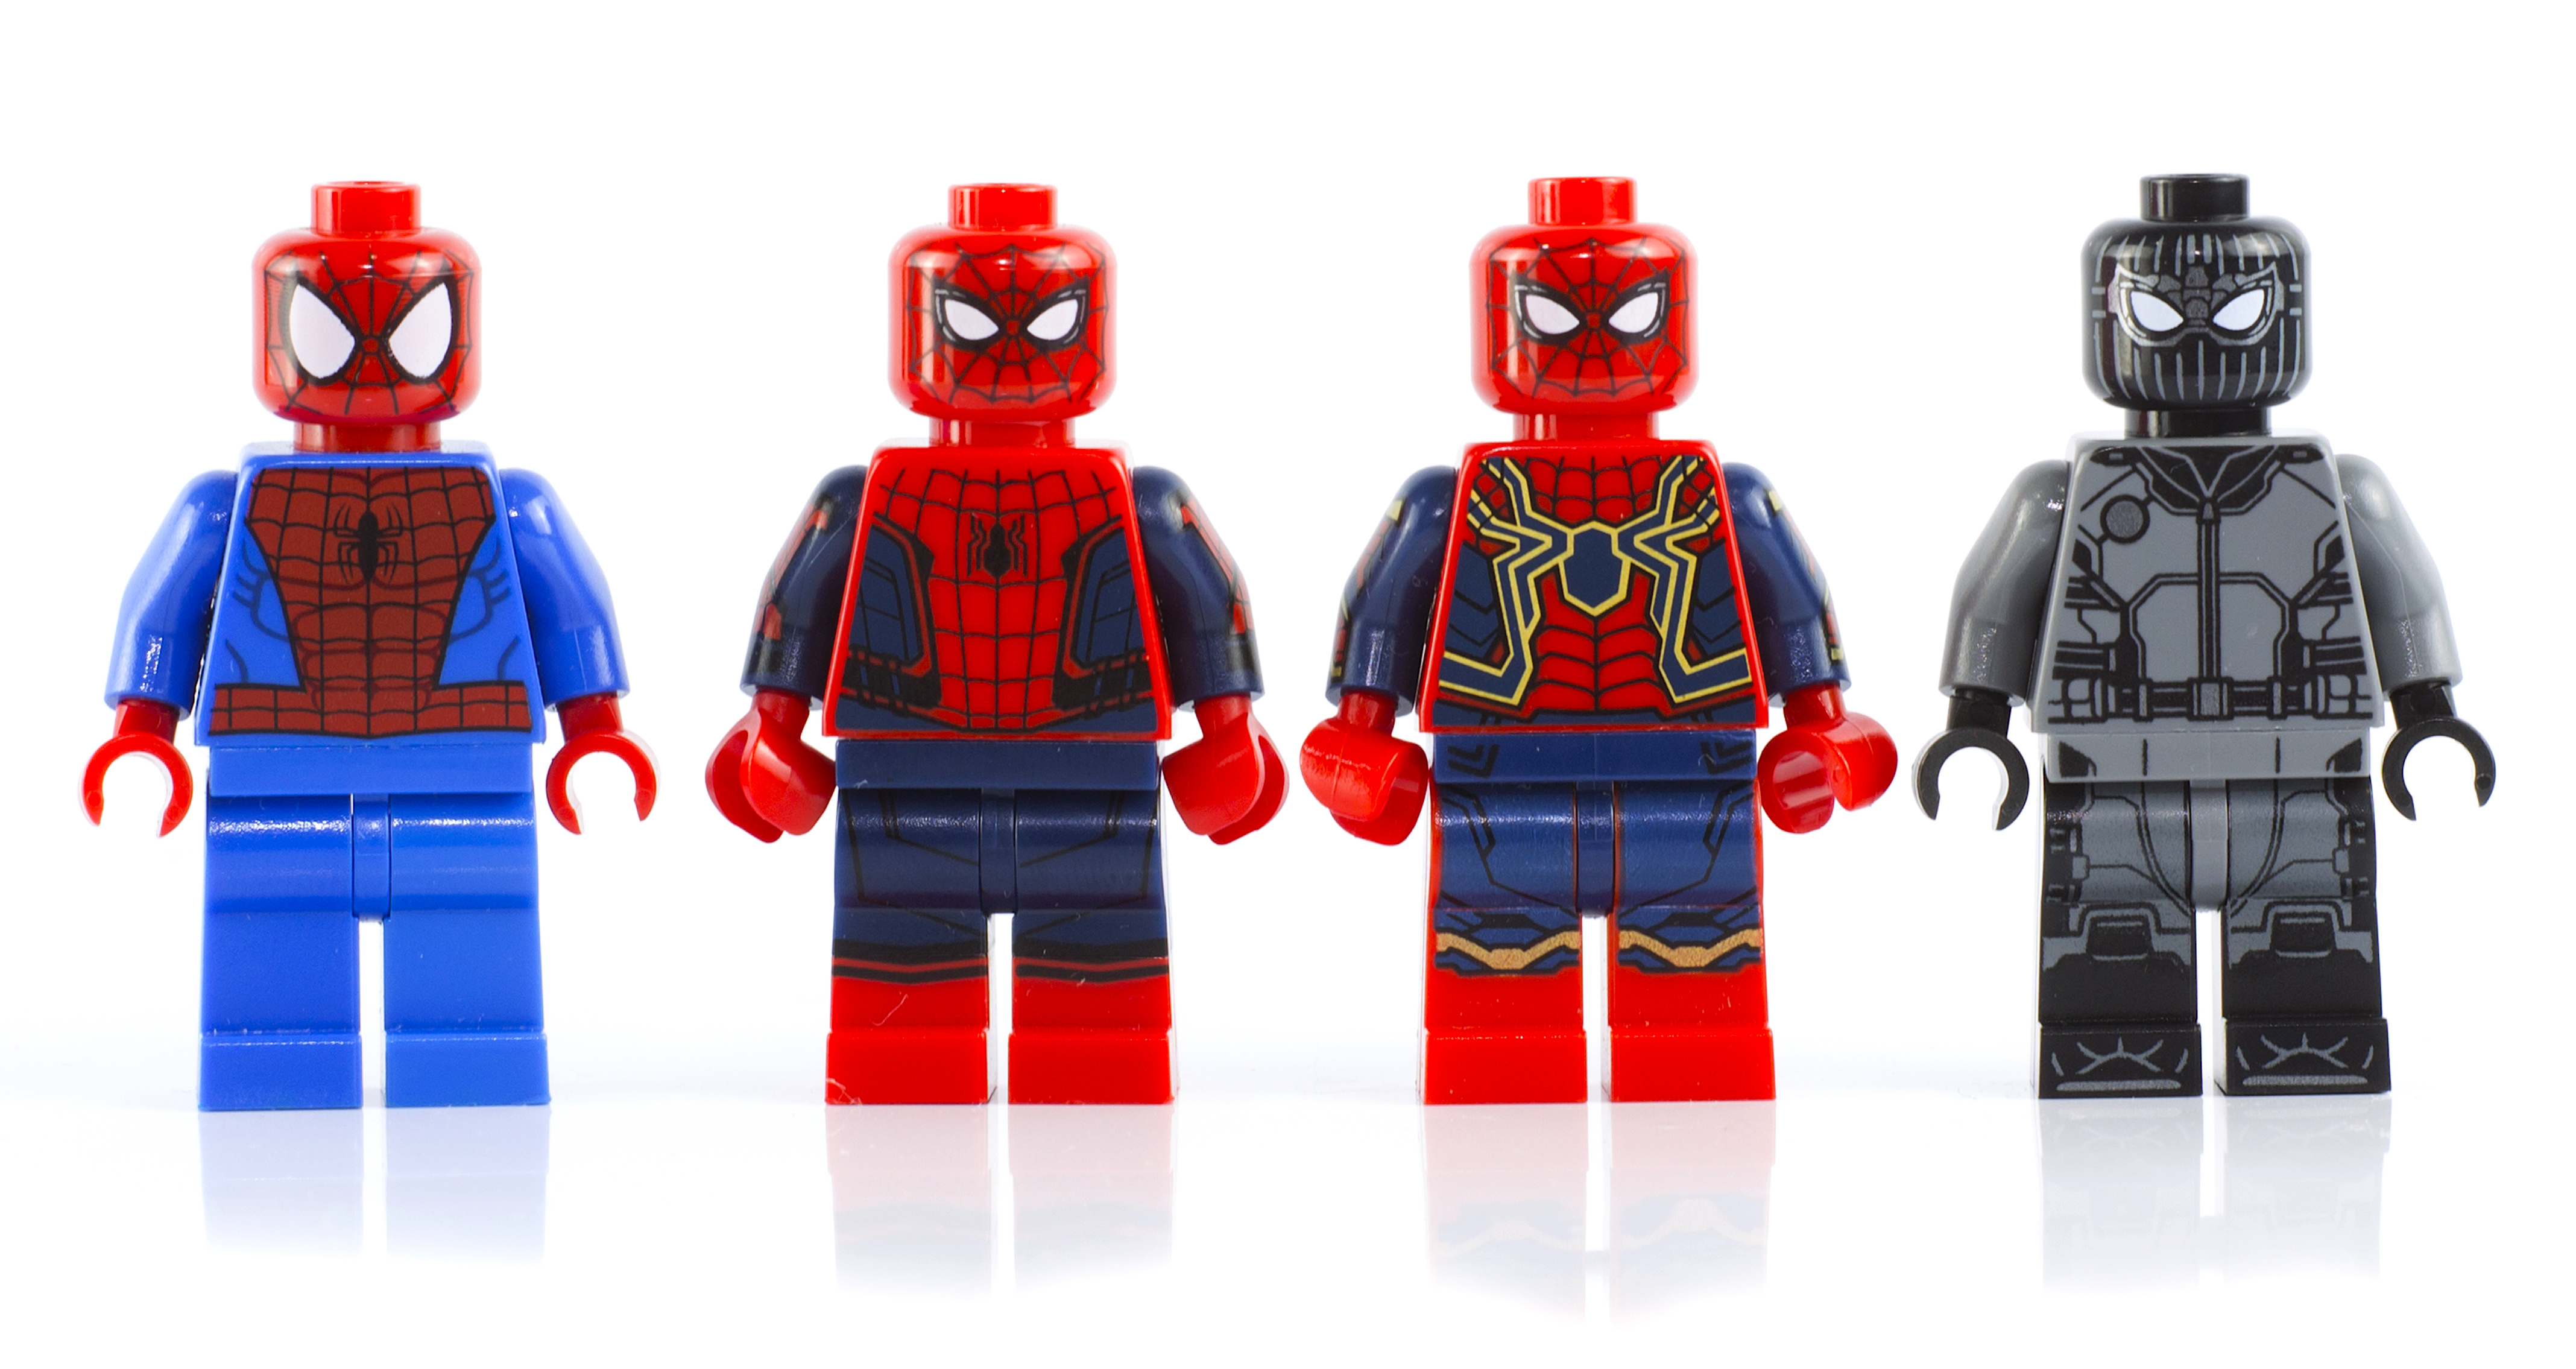 lego spider man far from home pack